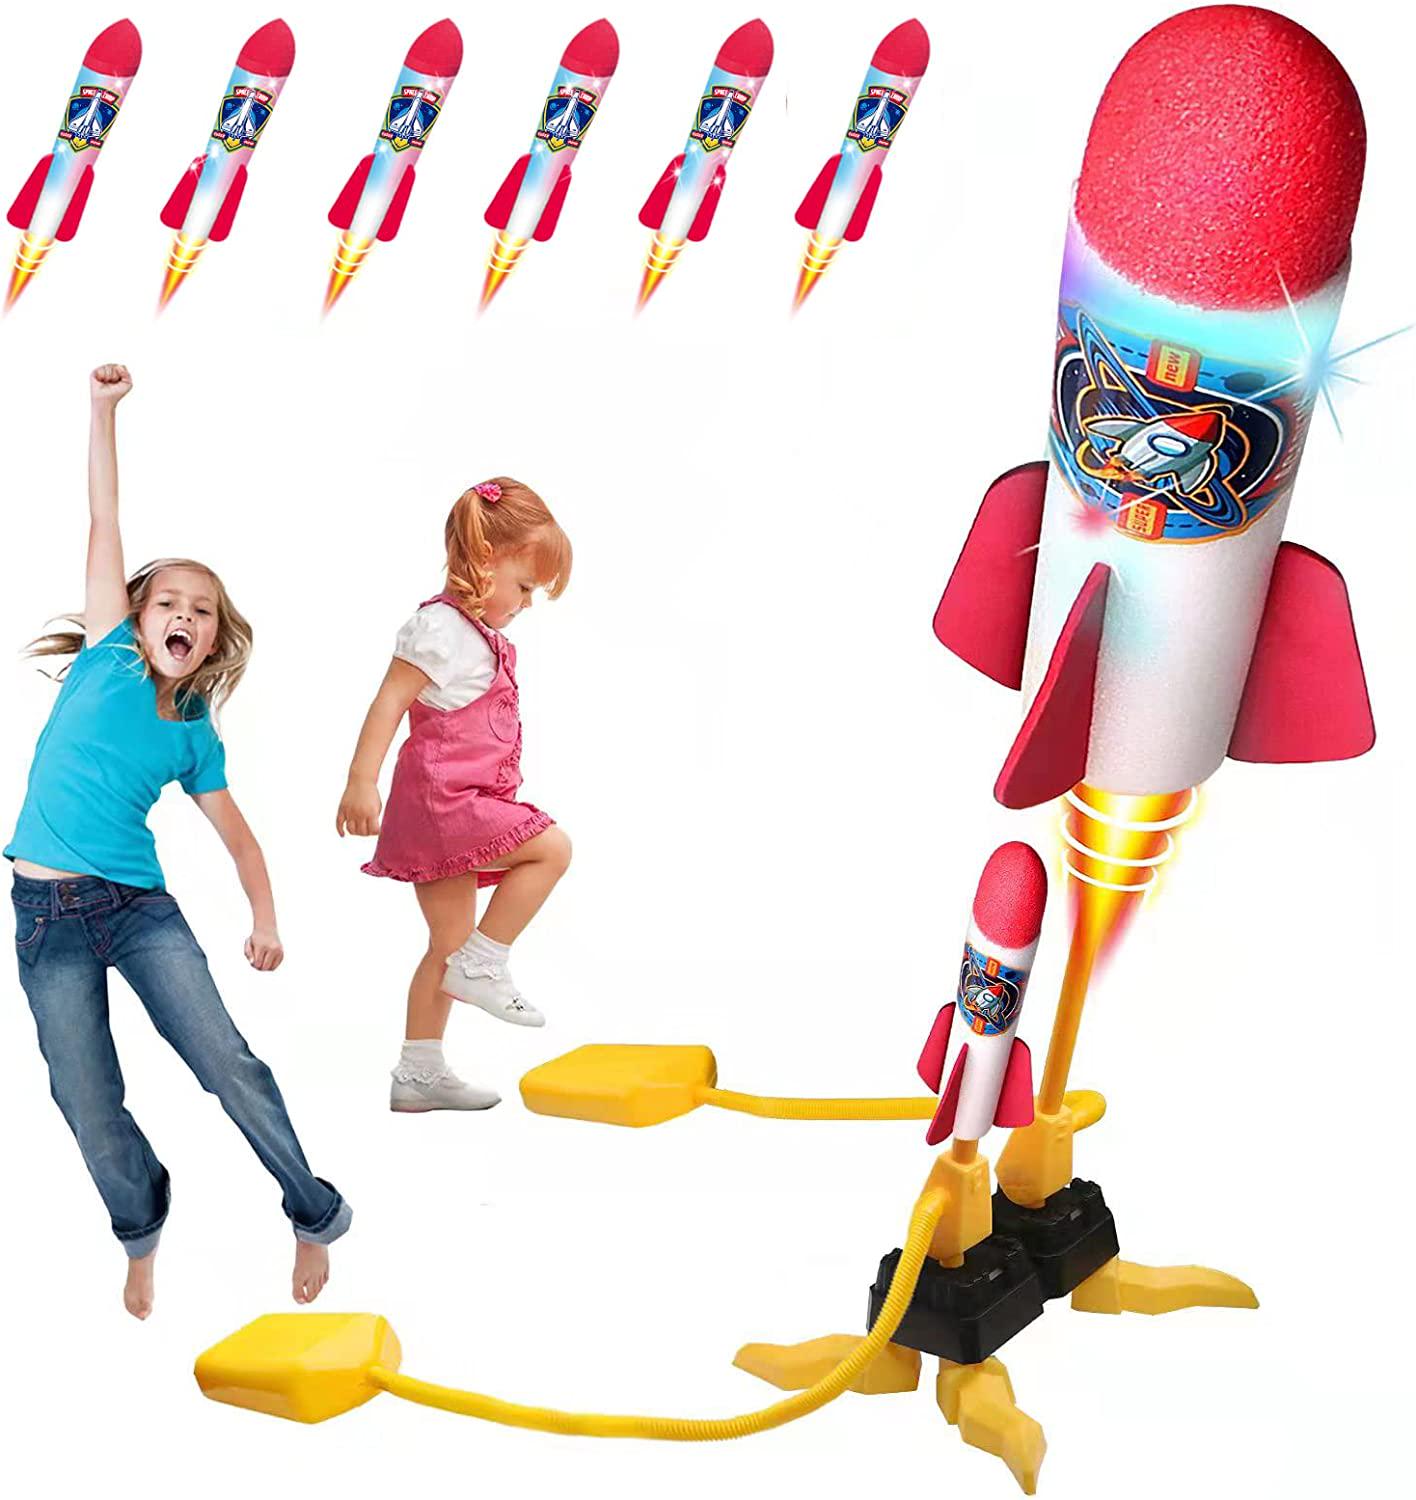 GIGIPIG, GIGIPIG Toy Rocket Launcher for Kids, Stomp Toy Rocket with 6 LED Foam Rockets 2 Launchers Air Rocket Launcher for Kids Shoot Up to 100 Feet Dueling Outdoor Toys for Boys Girls